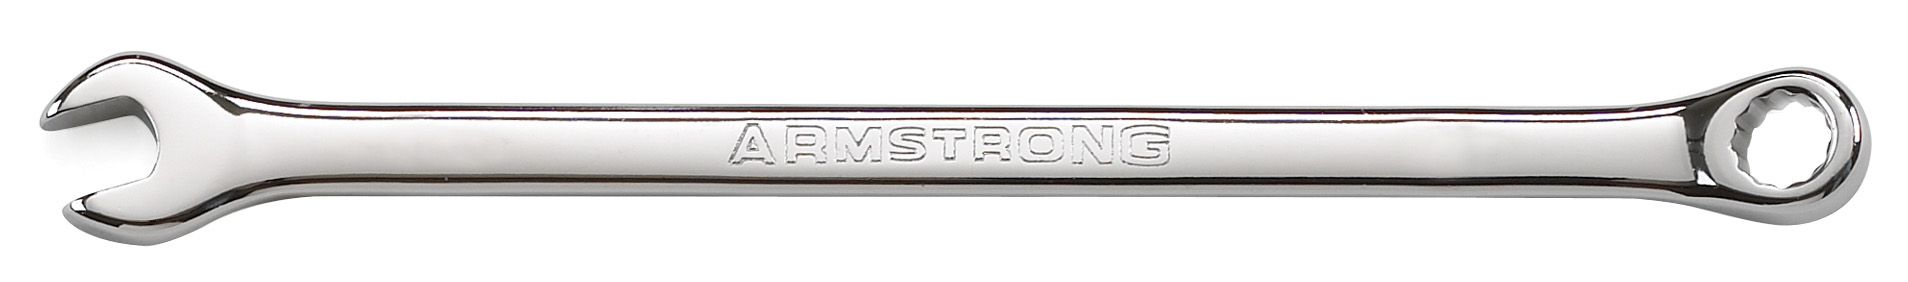 Armstrong 28 mm 12 pt. Full Polish Long Combination Wrench